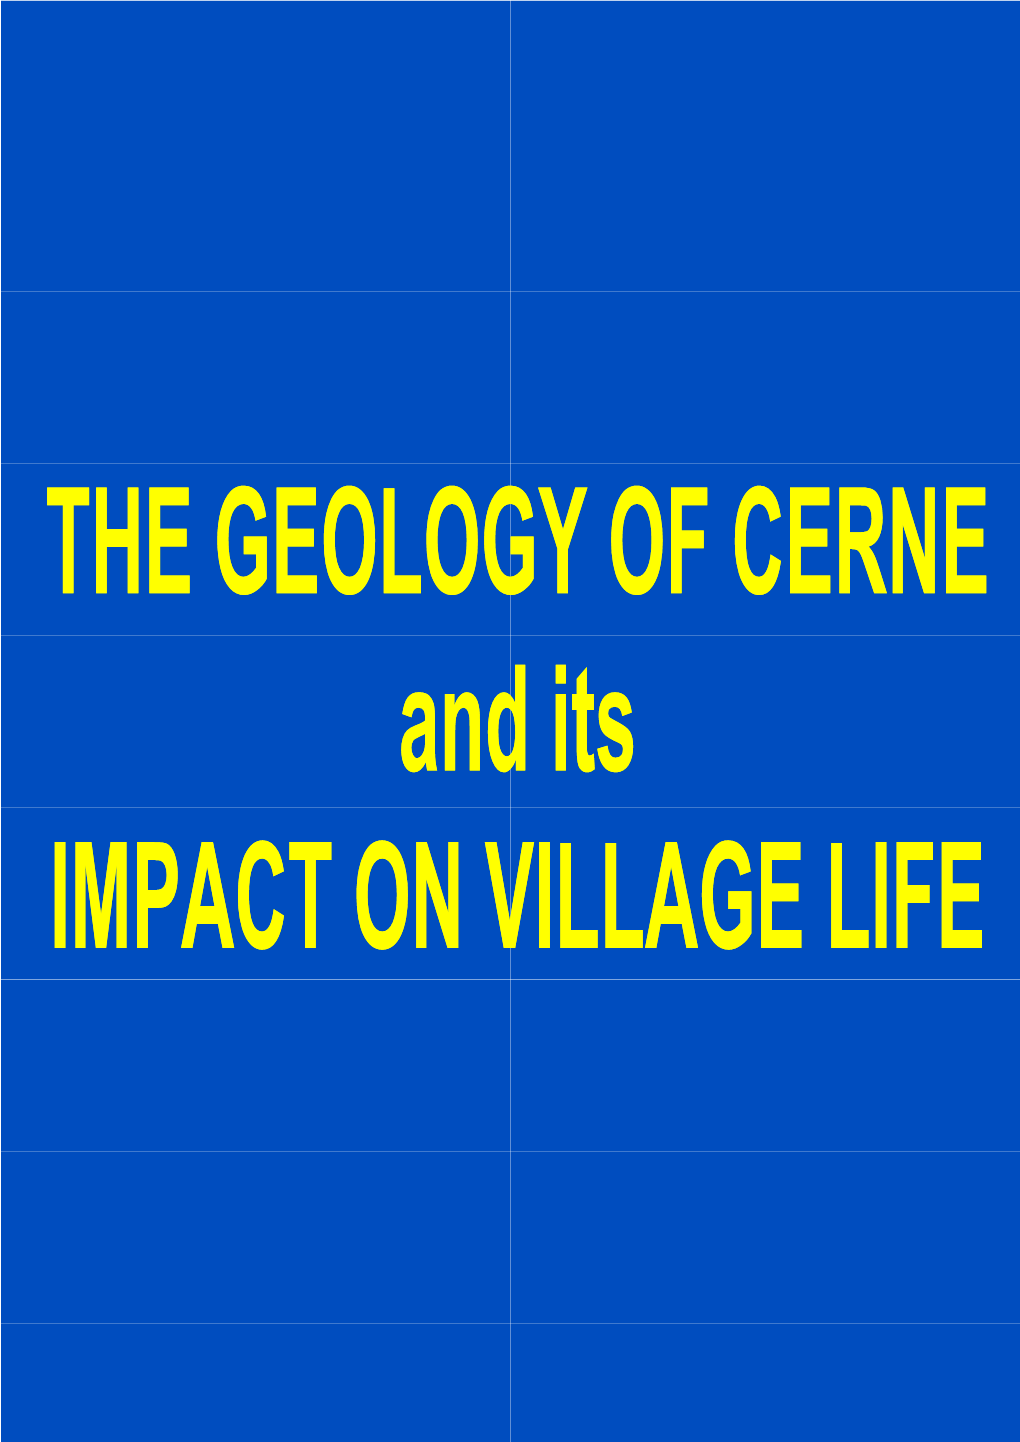 THE GEOLOG and IMPACT on V GY of CERNE D Its VILLAGE LIFE